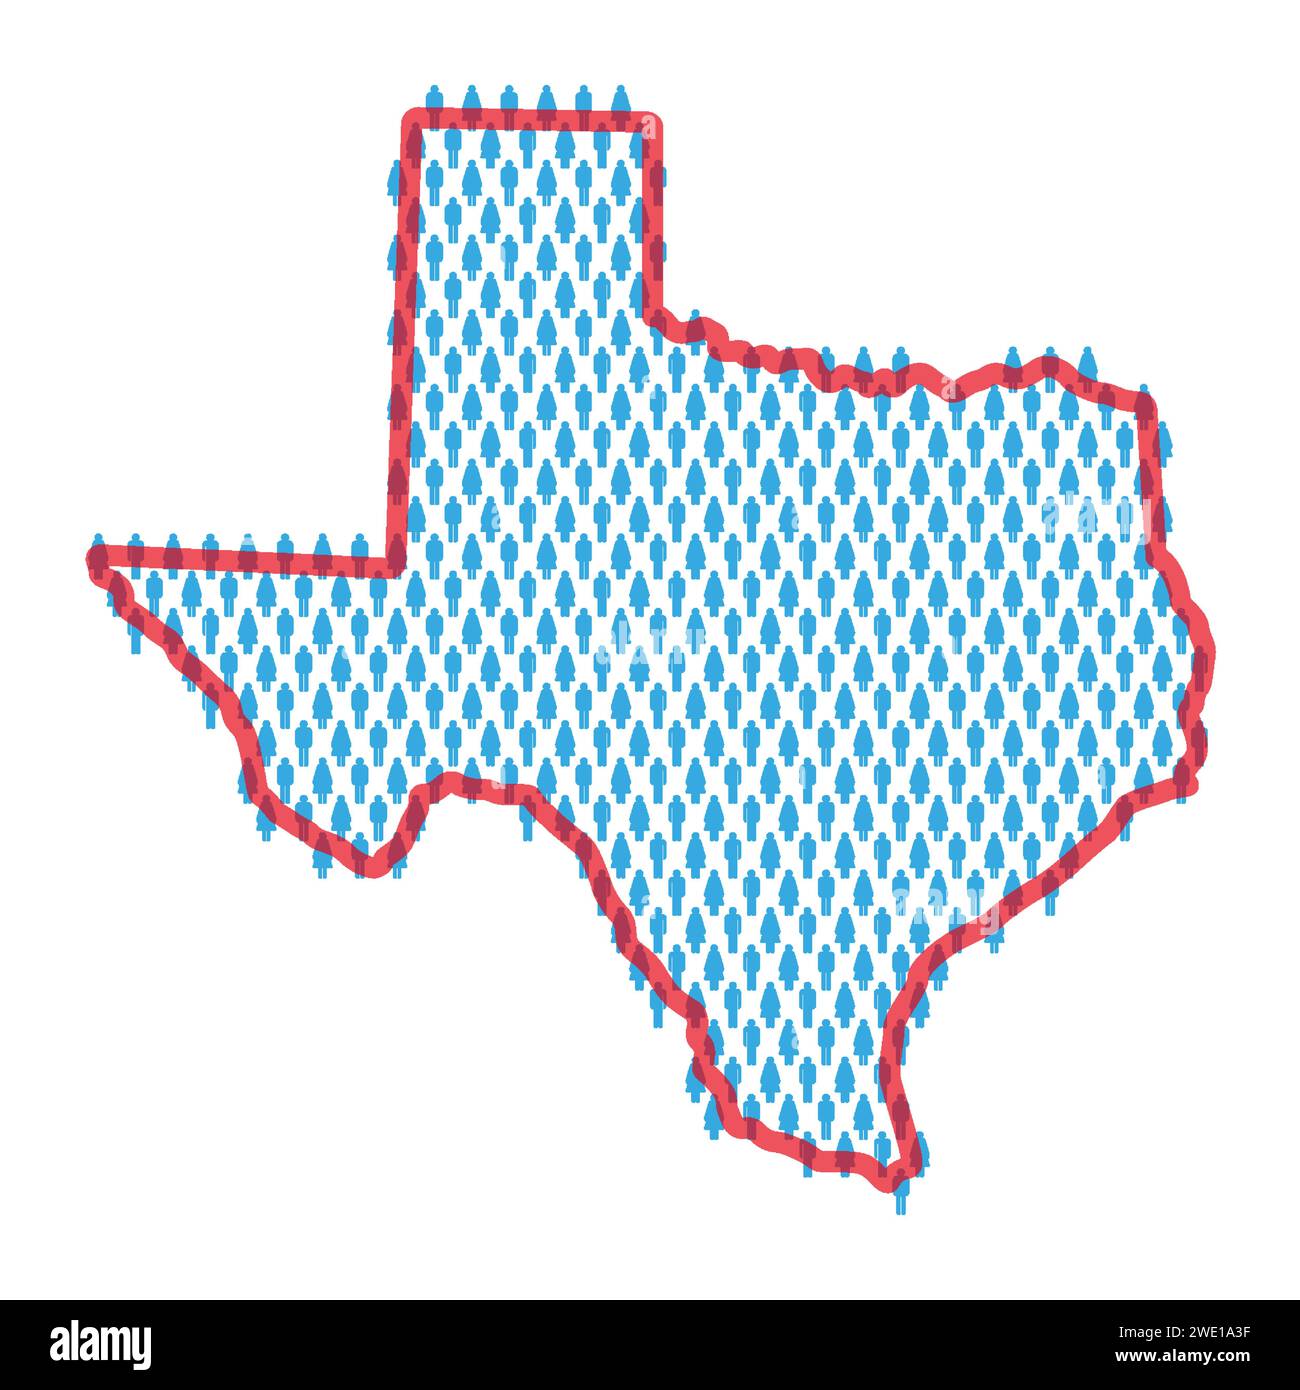 Texas population map. Stick figures people map with bold red translucent state border. Pattern of men and women icons. Isolated vector illustration. E Stock Vector